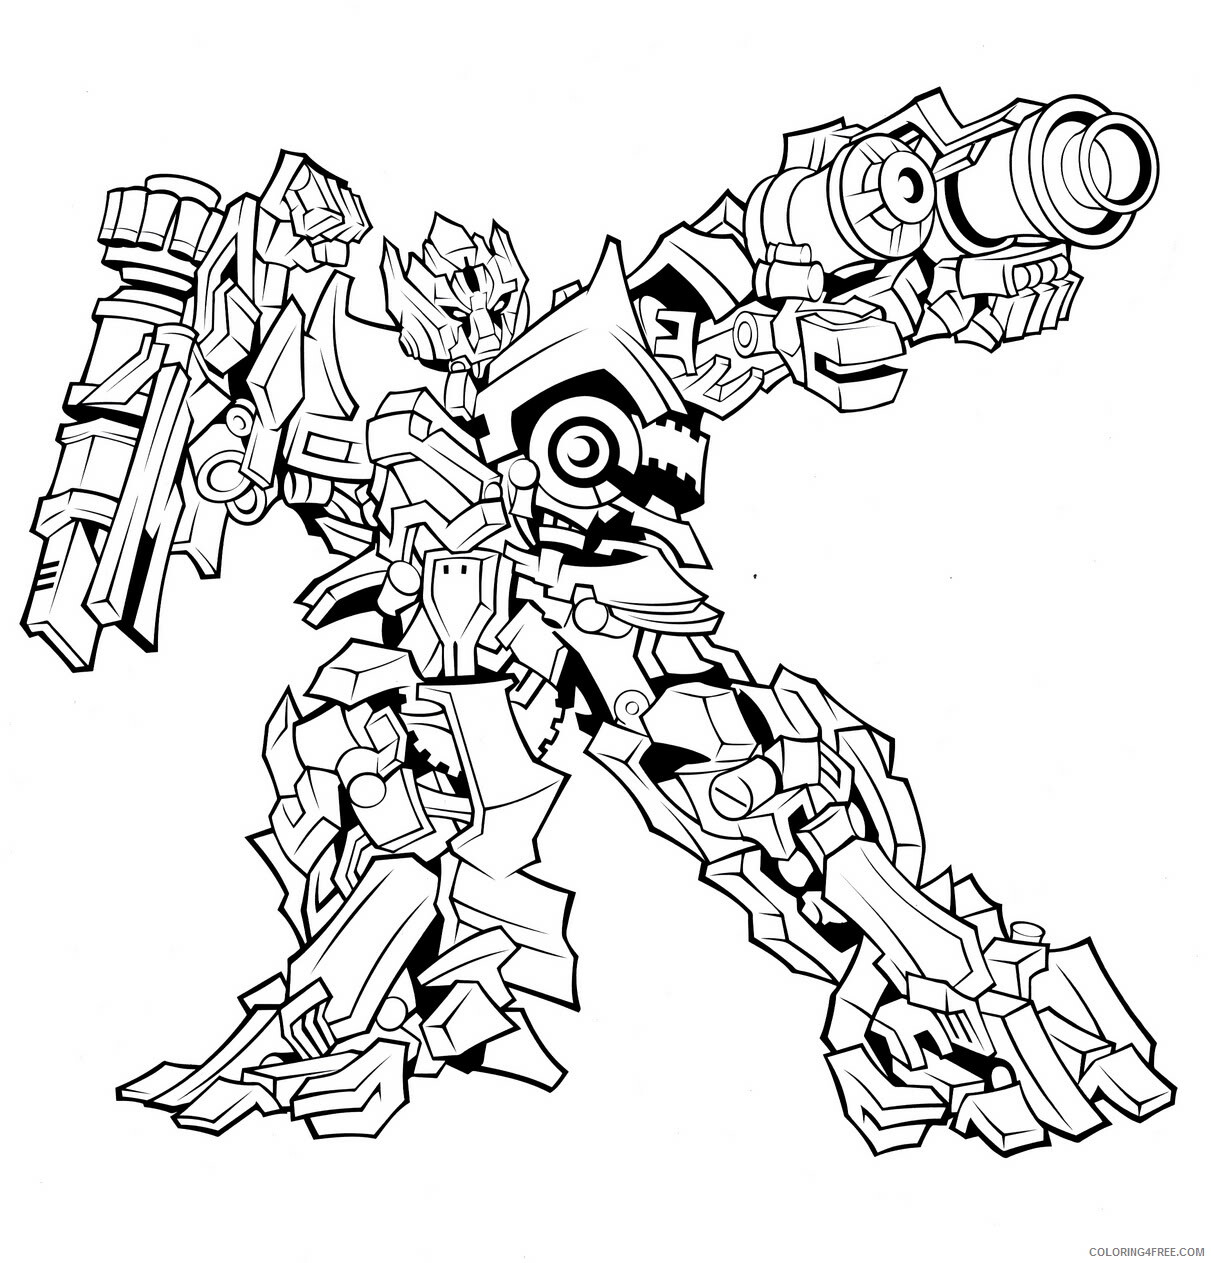 Transformers Coloring Pages TV Film Transformers Prime Printable 2020 10673 Coloring4free